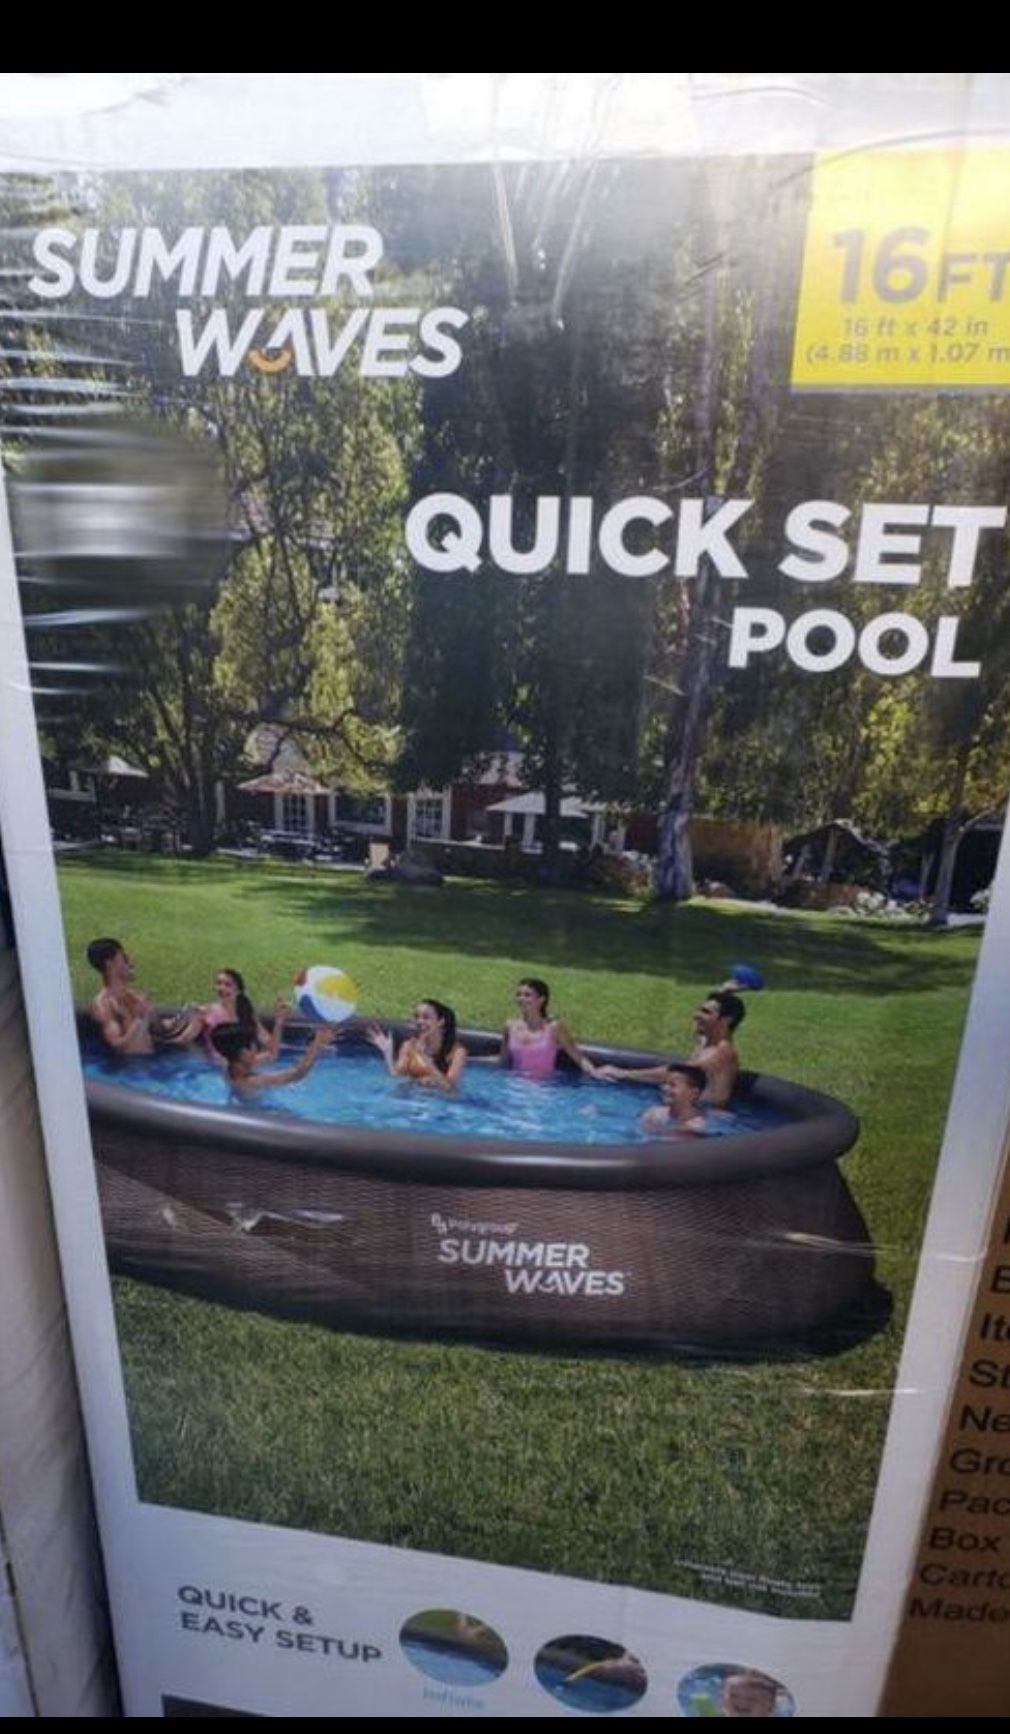 Brand new!!! Summer Waves 16 foot X 42 in Quick Set Pool - Pool, Ladder, Pump, and Filter